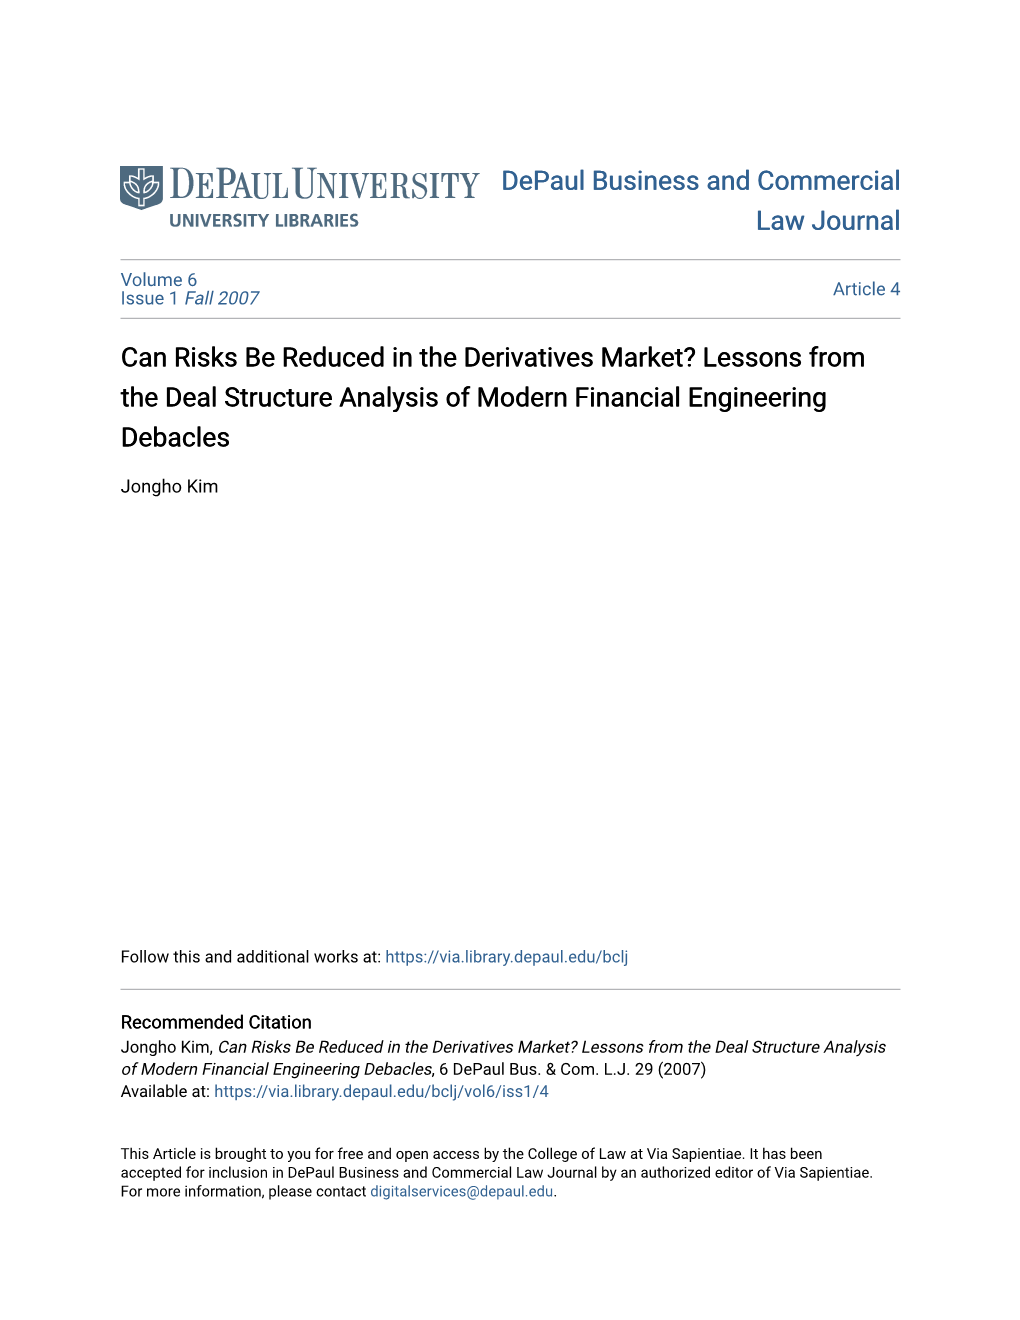 Can Risks Be Reduced in the Derivatives Market? Lessons from the Deal Structure Analysis of Modern Financial Engineering Debacles